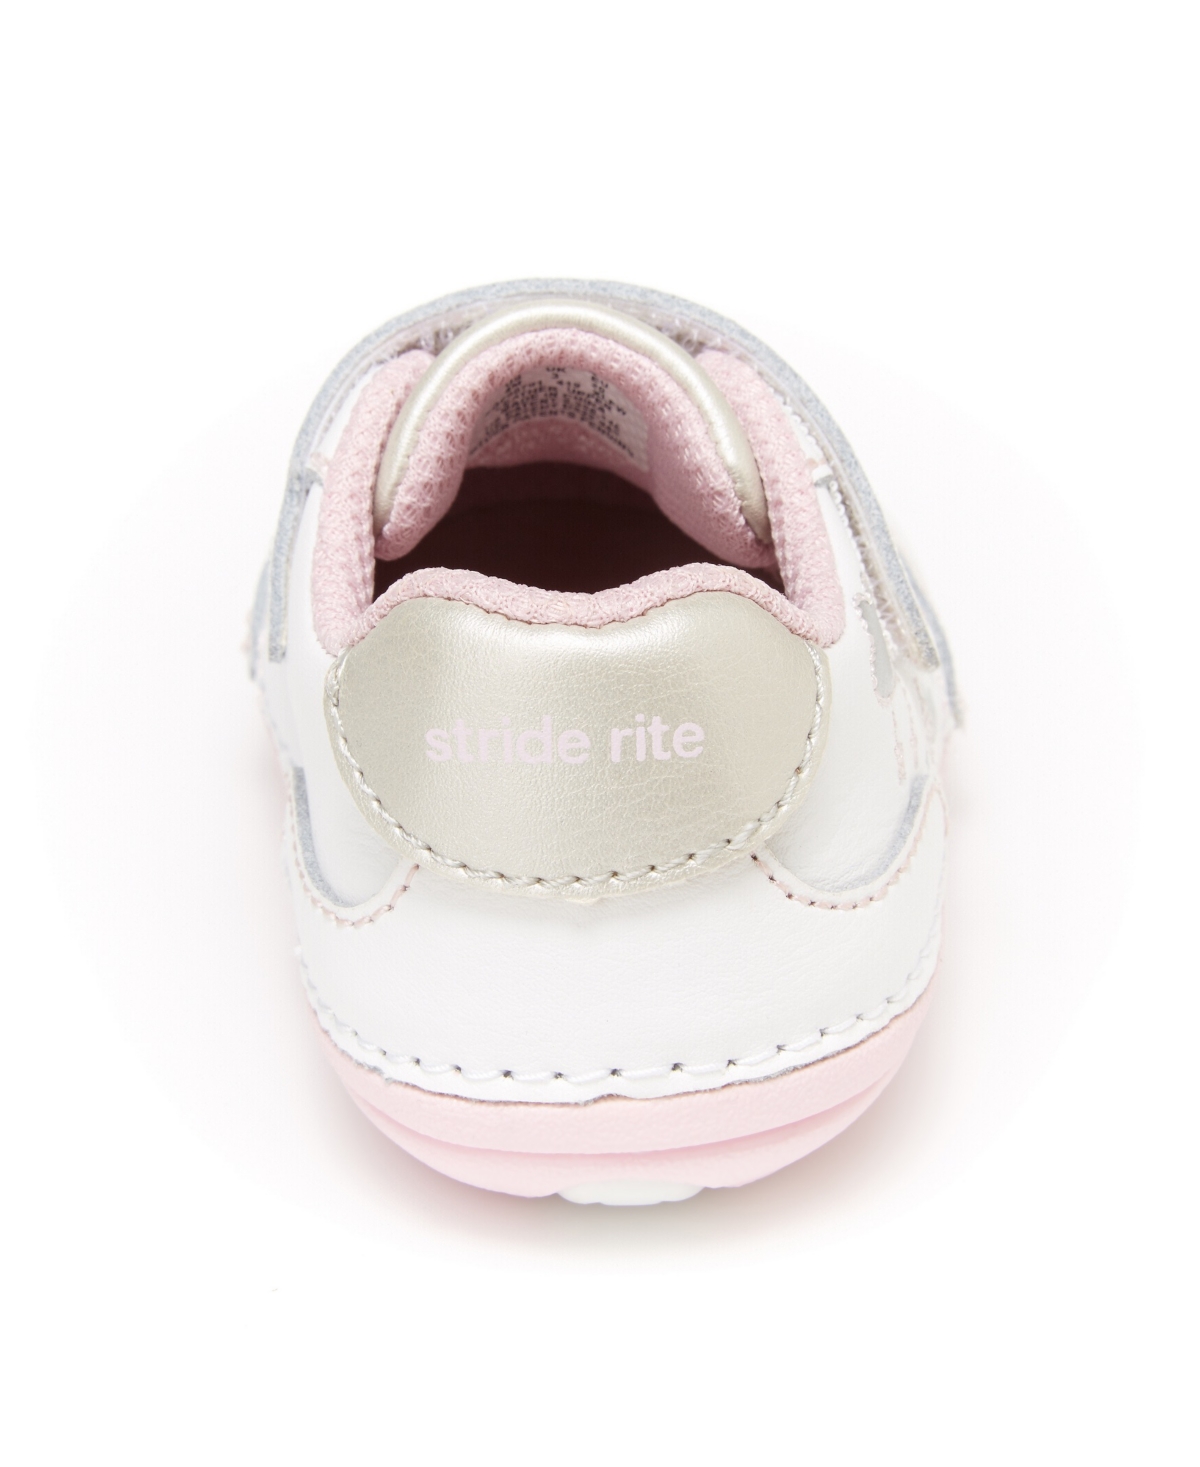 Shop Stride Rite Toddler Girls Soft Motion Adalyn Casual Shoes In White,pink